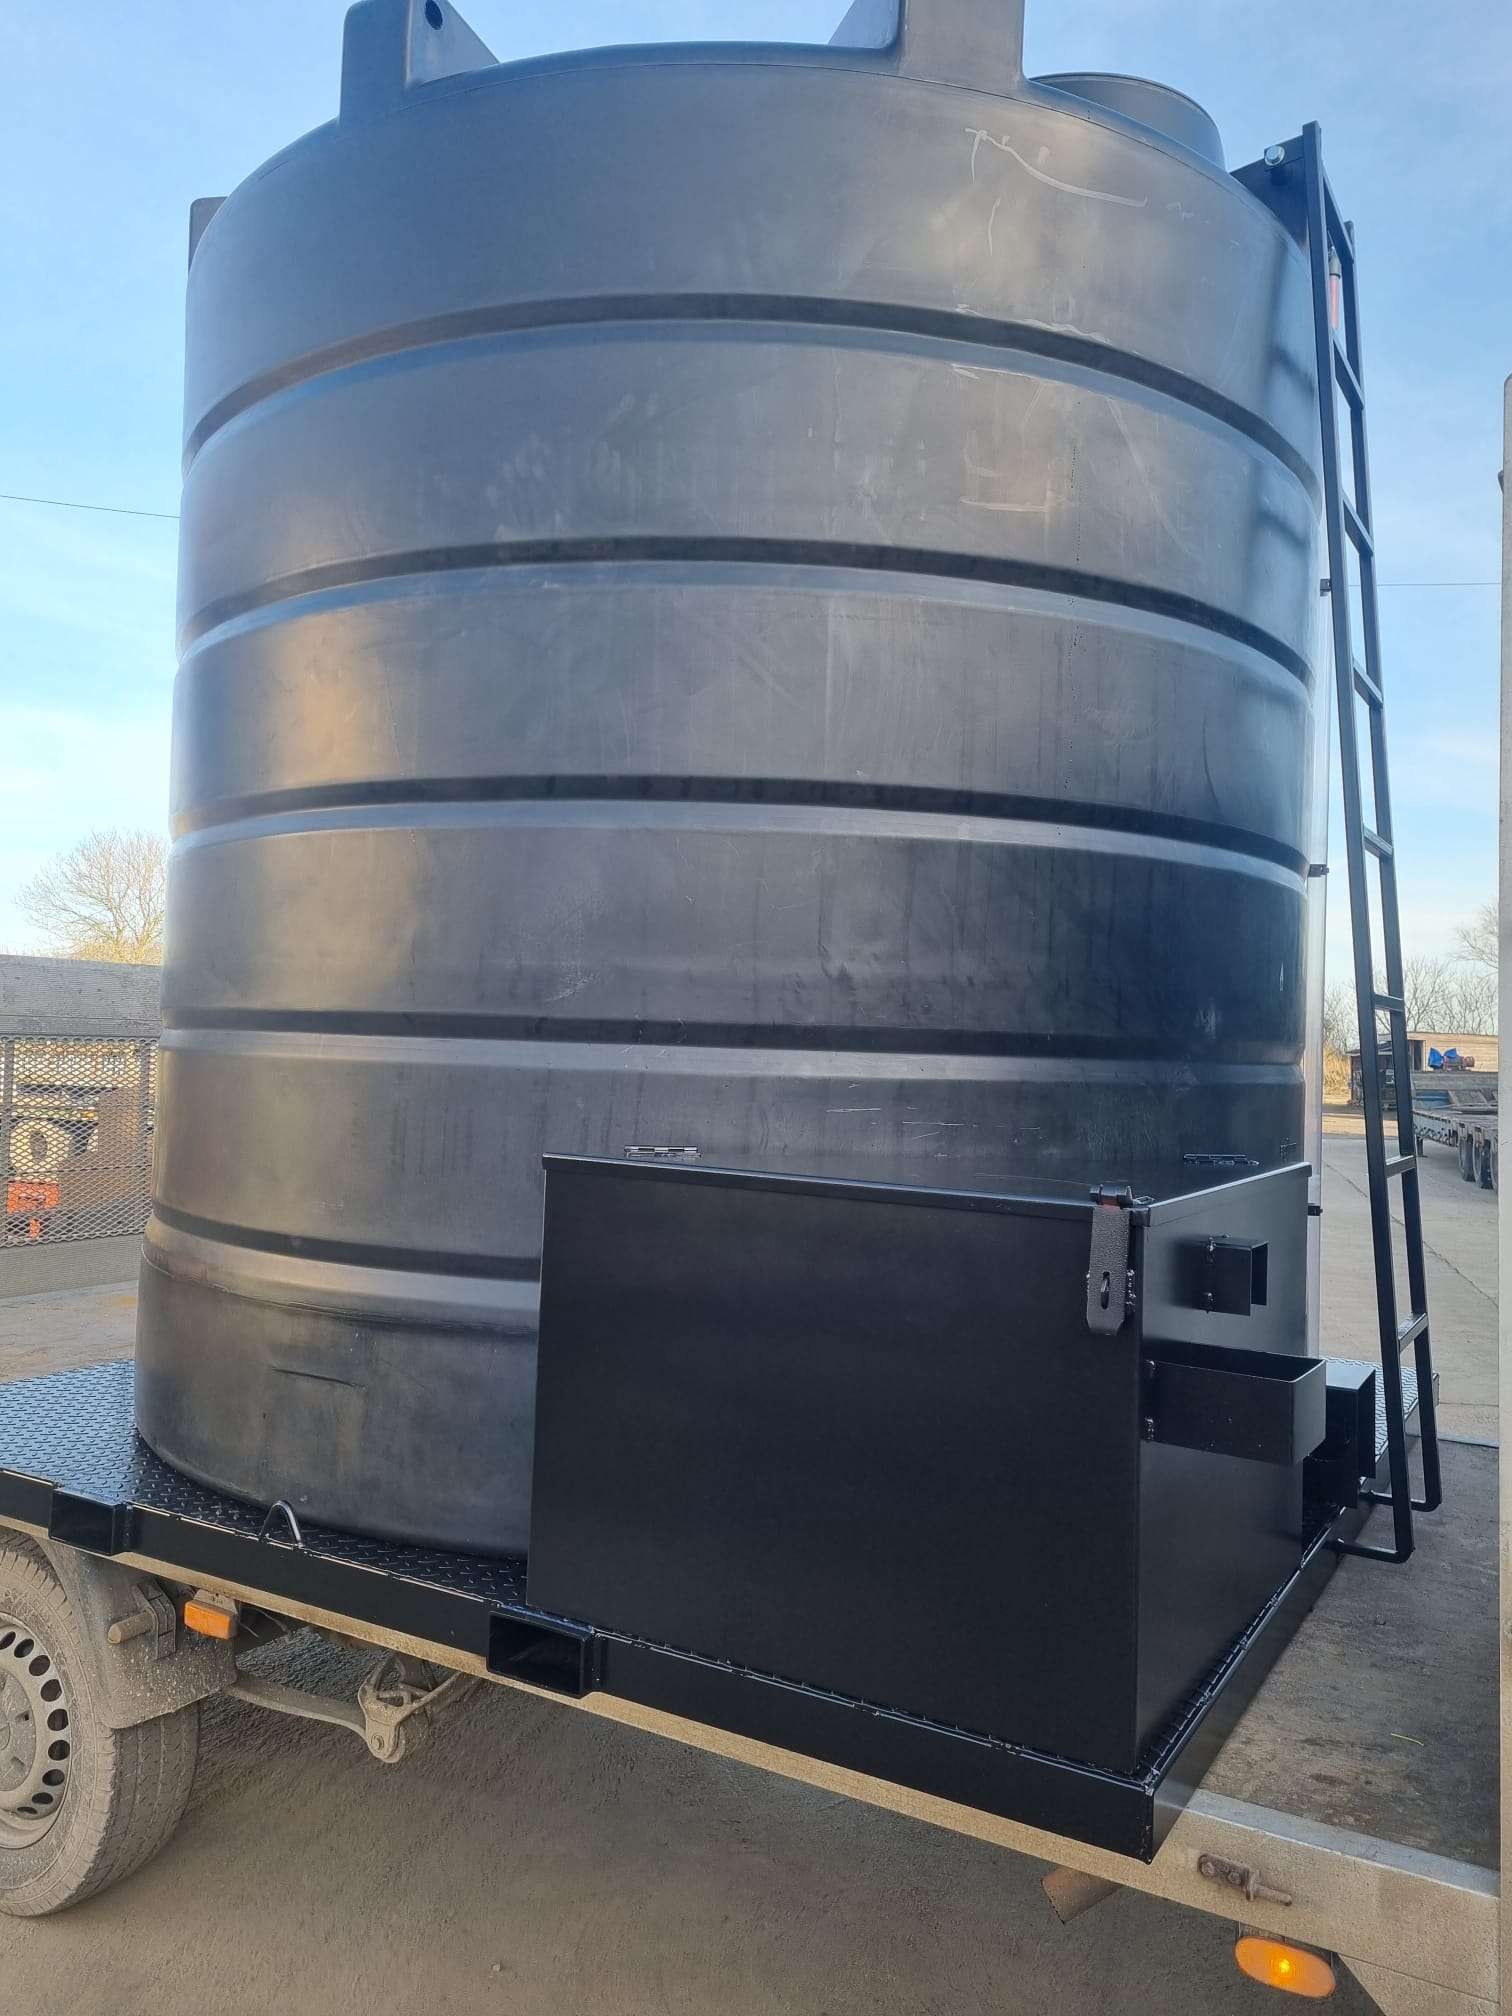 Affordable 10,000ltr Water Tank, With On Demand Pump To Hire In Derby